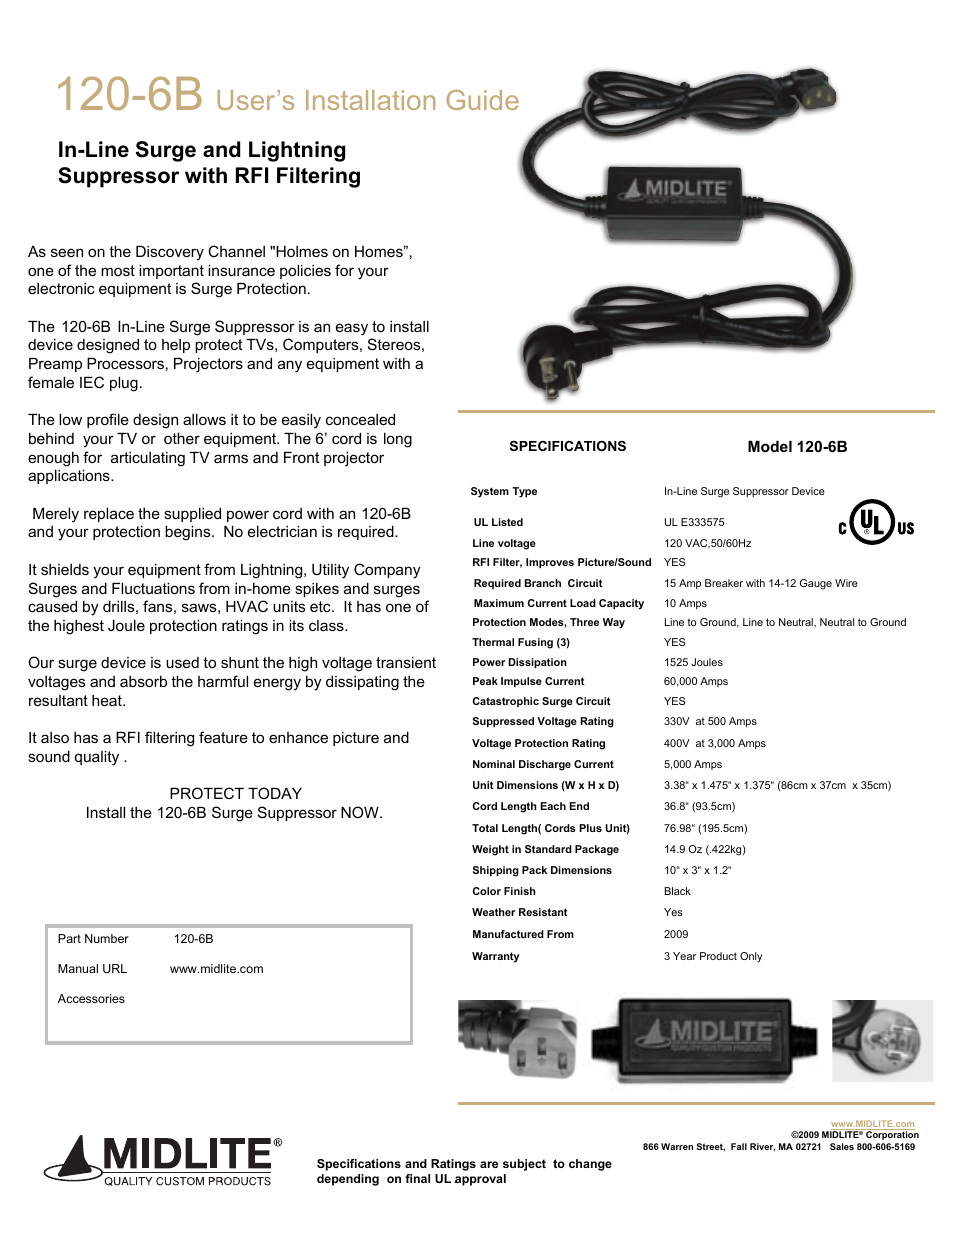 IN-LINE SURGE AND LIGHTNING SUPPRESSOR WITH RFI FILTERING